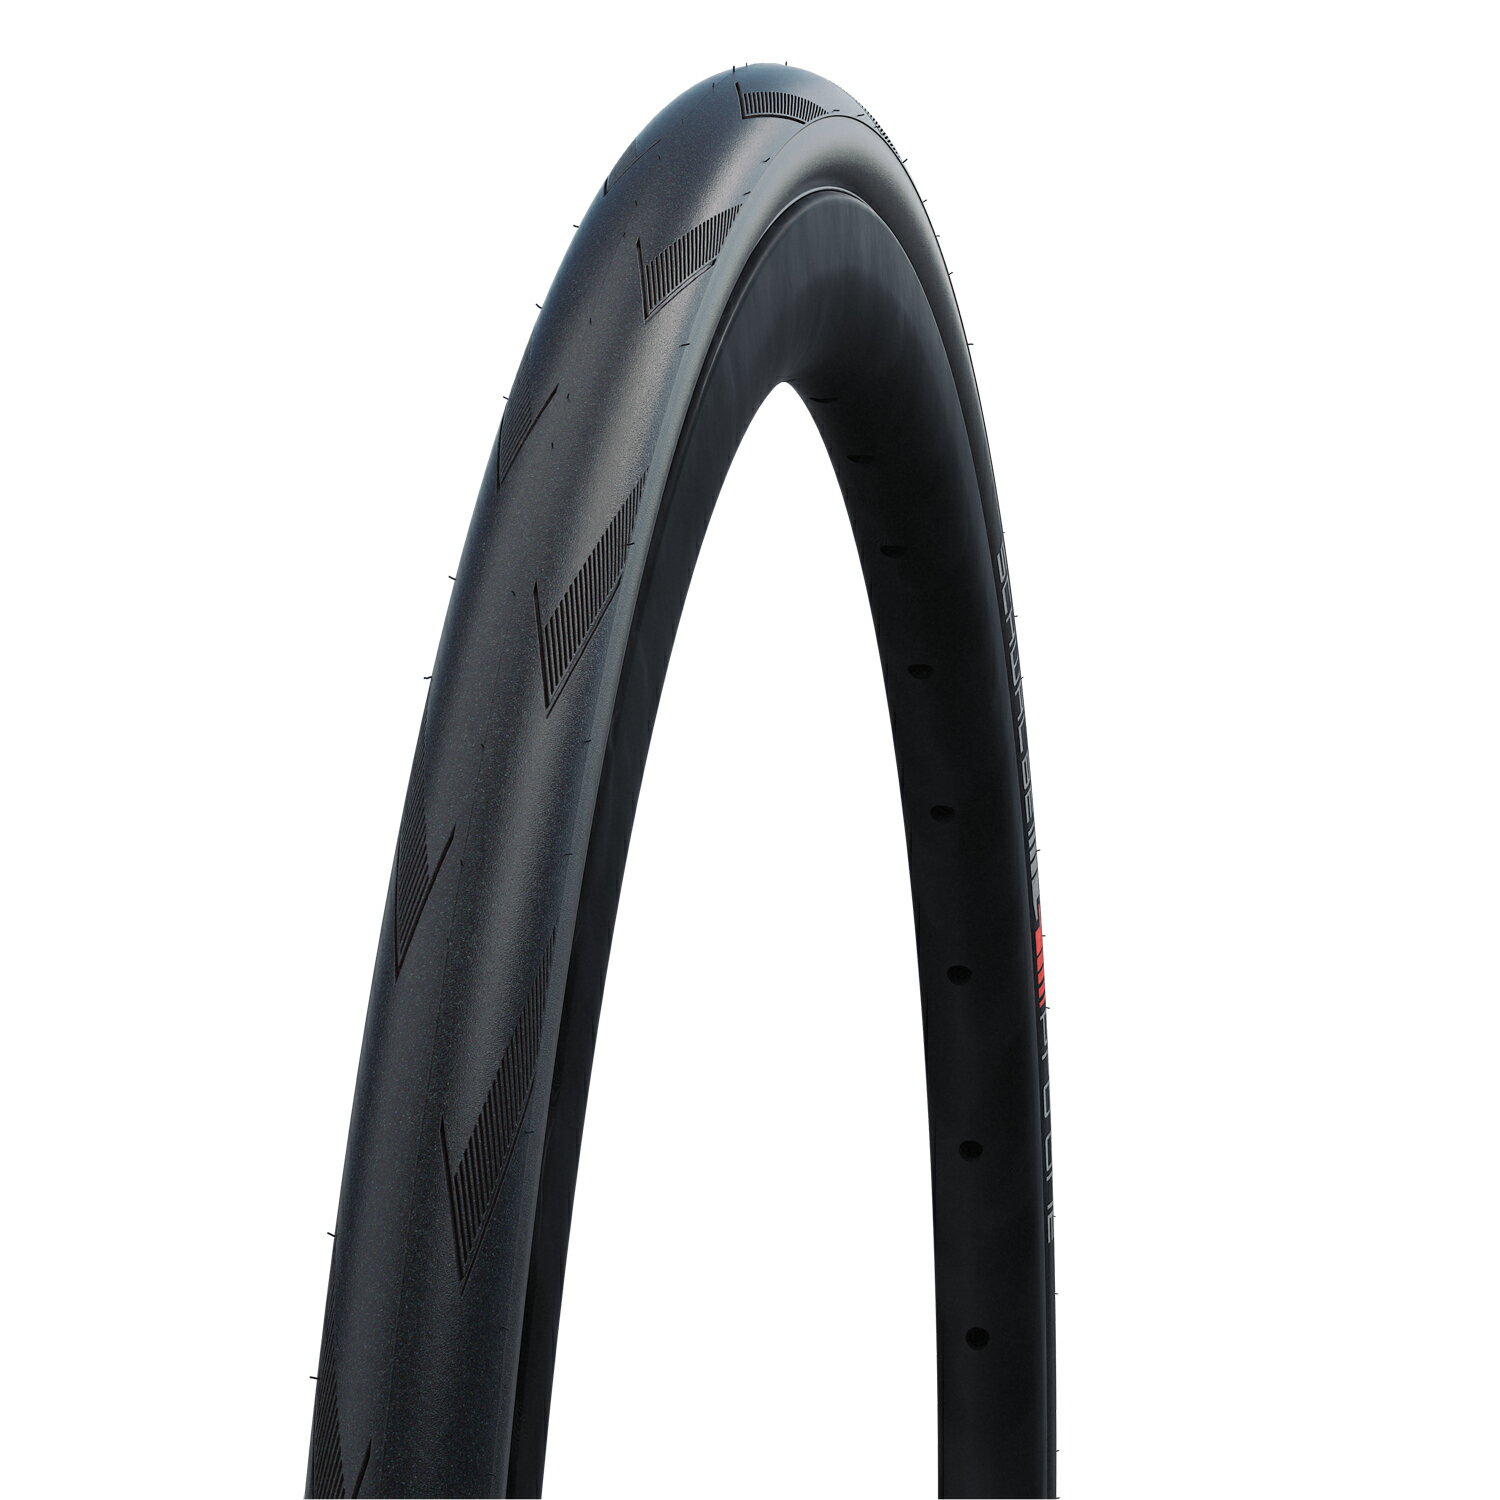 [K㗝Xi] SCHWALBE(Vx) PRO ONE TLE(v TUBELESS EASY `[uXC[W[) [hoCNp `[uXC[W[ ^C uubNv 700C 700~25C SW11653974ykCEEn zsz